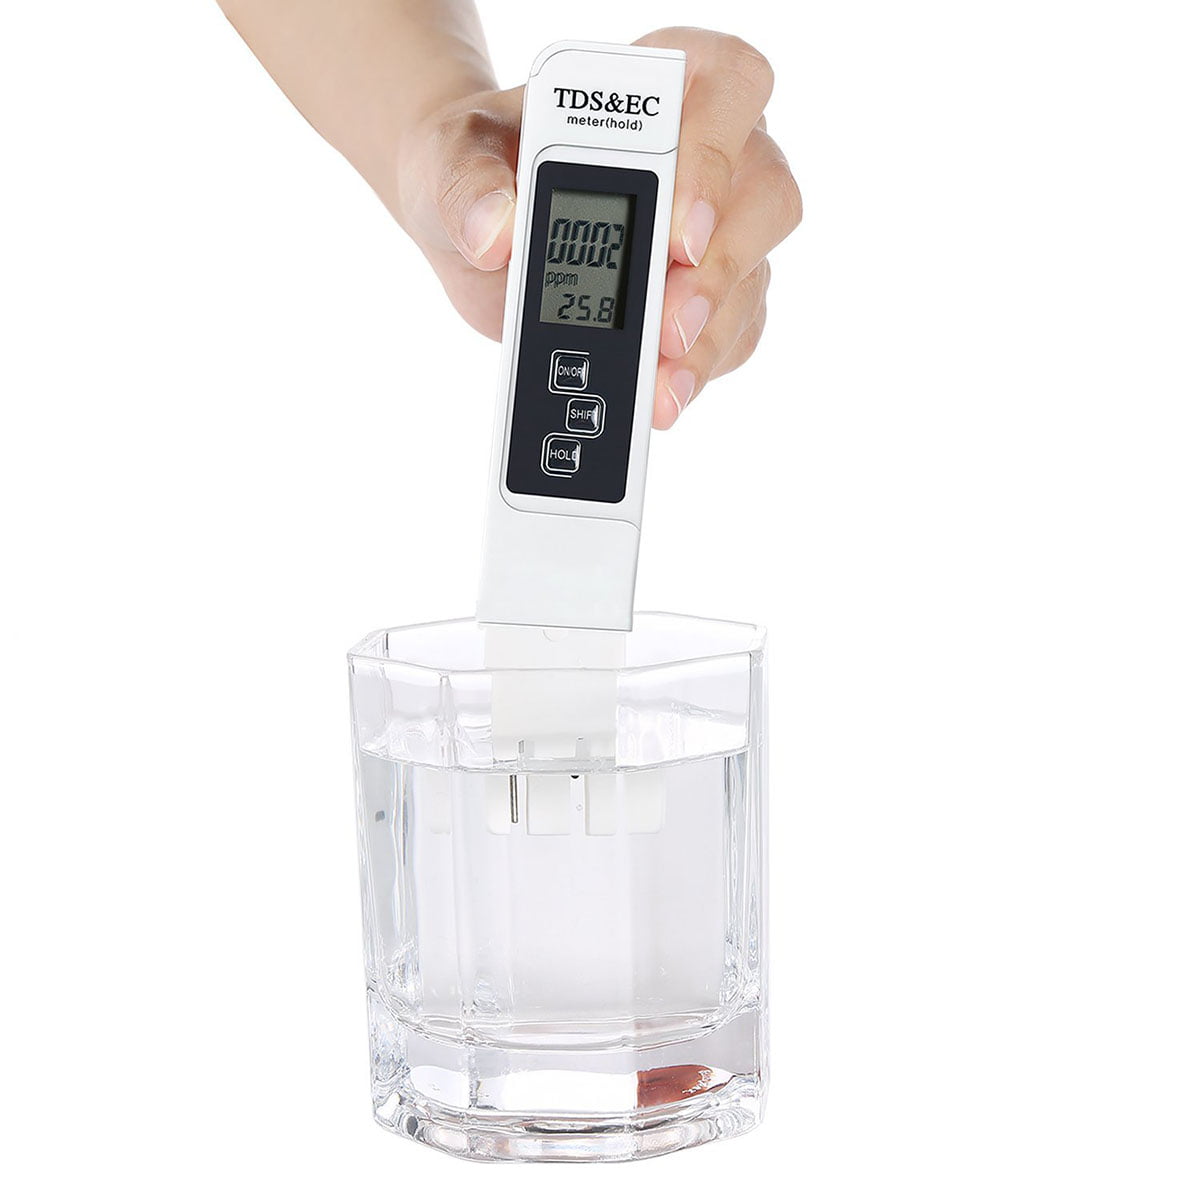 0-9990ppm Accurate and Reliable Temperature Meter 2 in 1 Ideal Water Test Meter for Drinking Water Yellow Aquariums TDS Meter Water Quality Tester